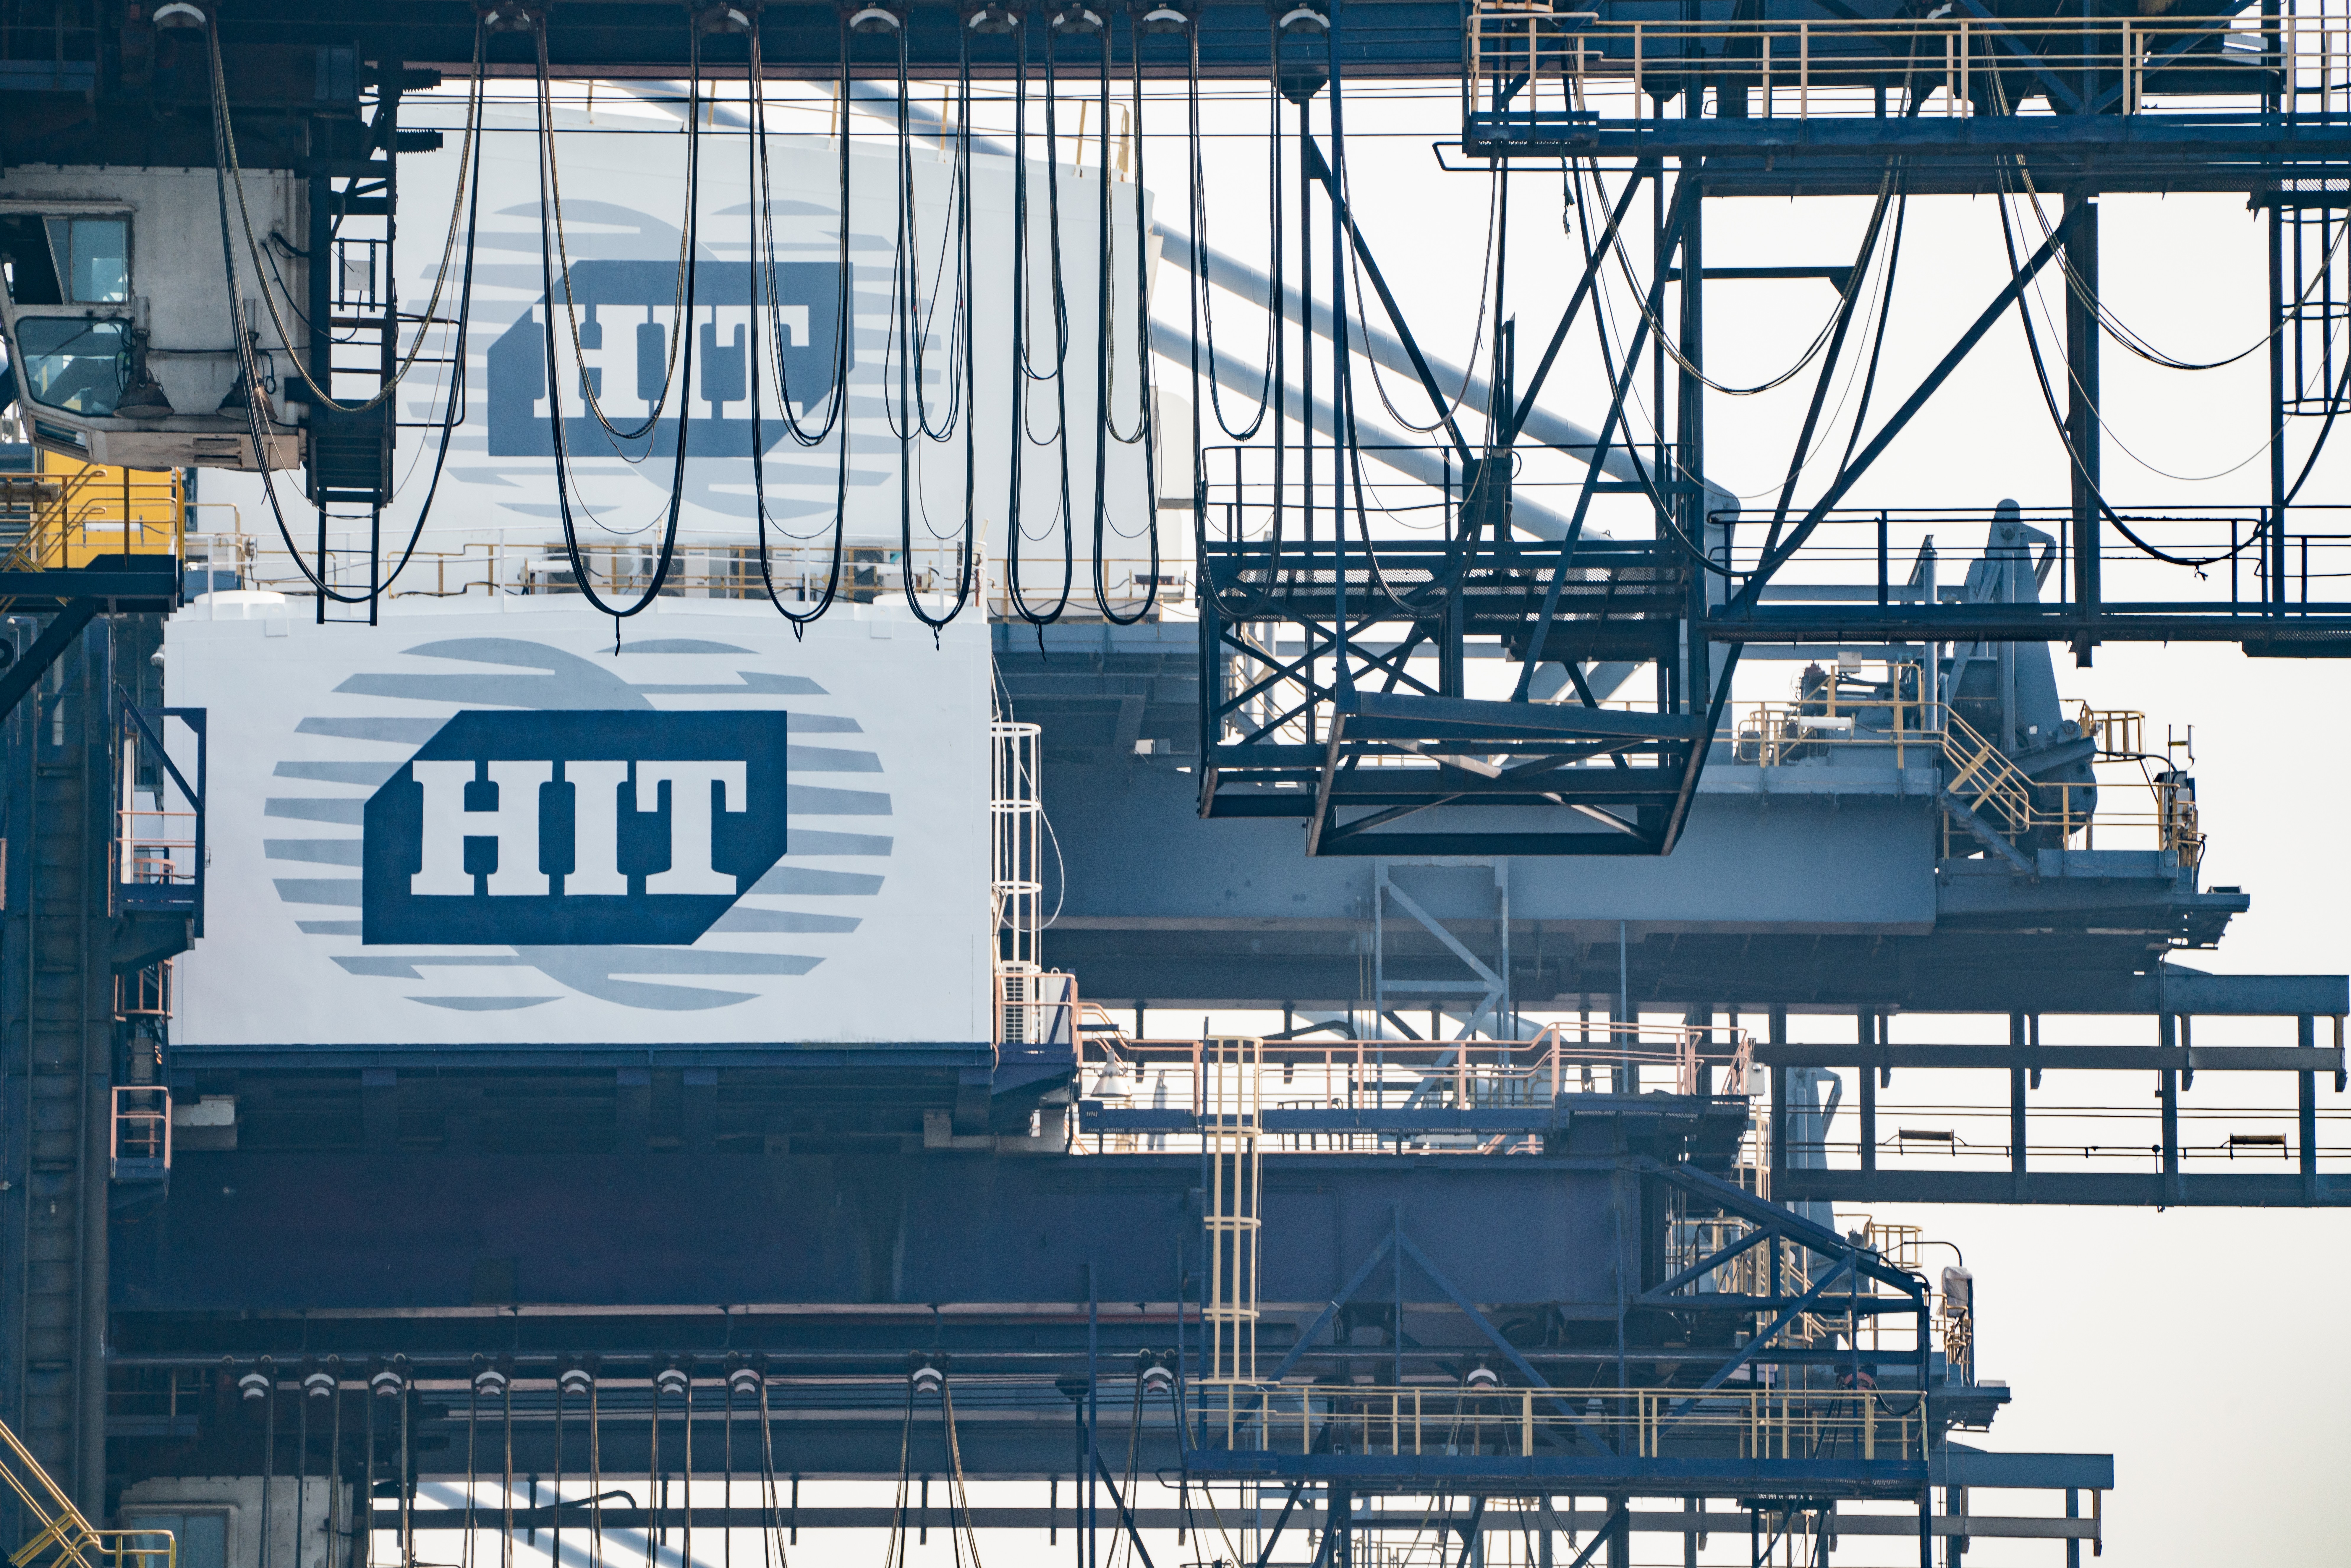 Signage for Hong Kong International Terminal (HIT), a unit of CK Hutchison Holdings, on gantry cranes at Container Terminal 9 at Kwai Tsing Container Terminal in Hong Kong on Tuesday, January 22, 2019. Photo: Bloomberg